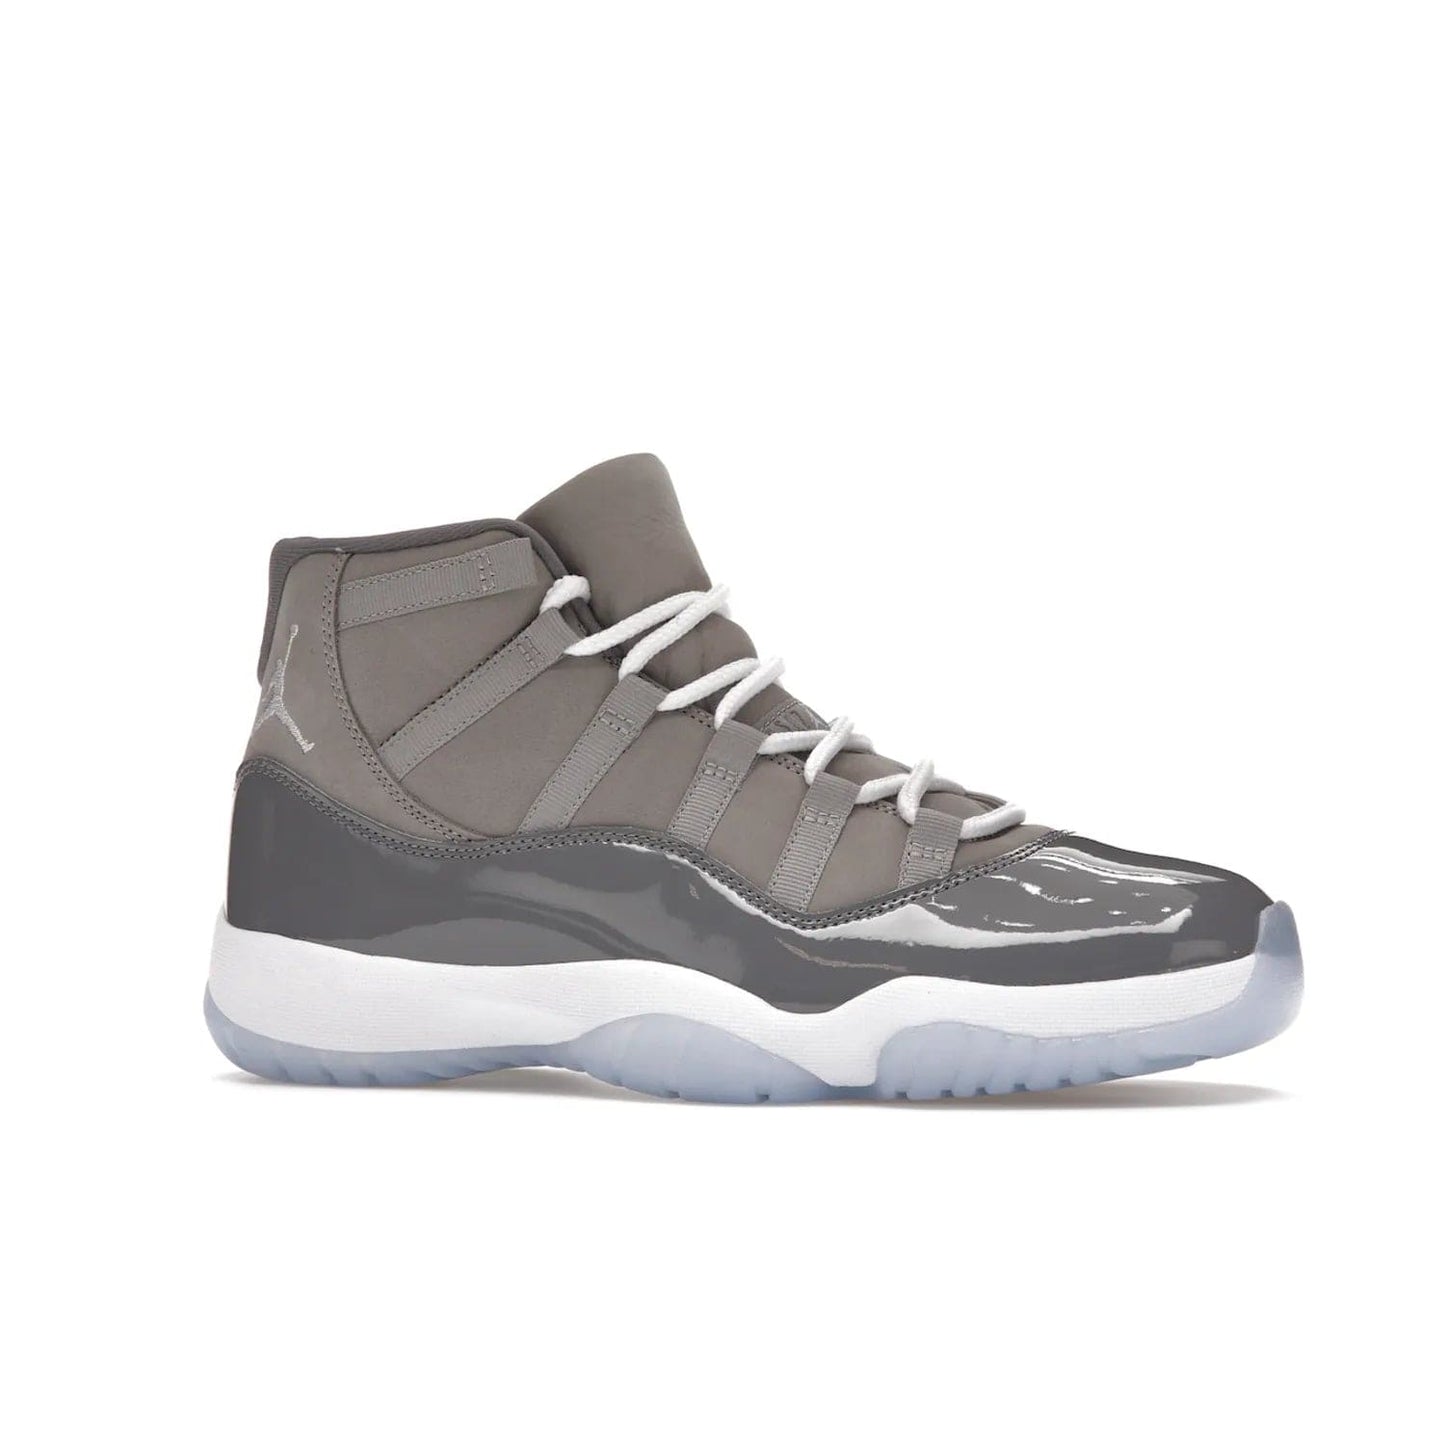 Jordan 11 Retro Cool Grey (2021) - Image 3 - Only at www.BallersClubKickz.com - Shop the Air Jordan 11 Retro Cool Grey (2021) for a must-have sneaker with a Cool Grey Durabuck upper, patent leather overlays, signature Jumpman embroidery, a white midsole, icy blue translucent outsole, and Multi-Color accents.  Released in December 2021 for $225.